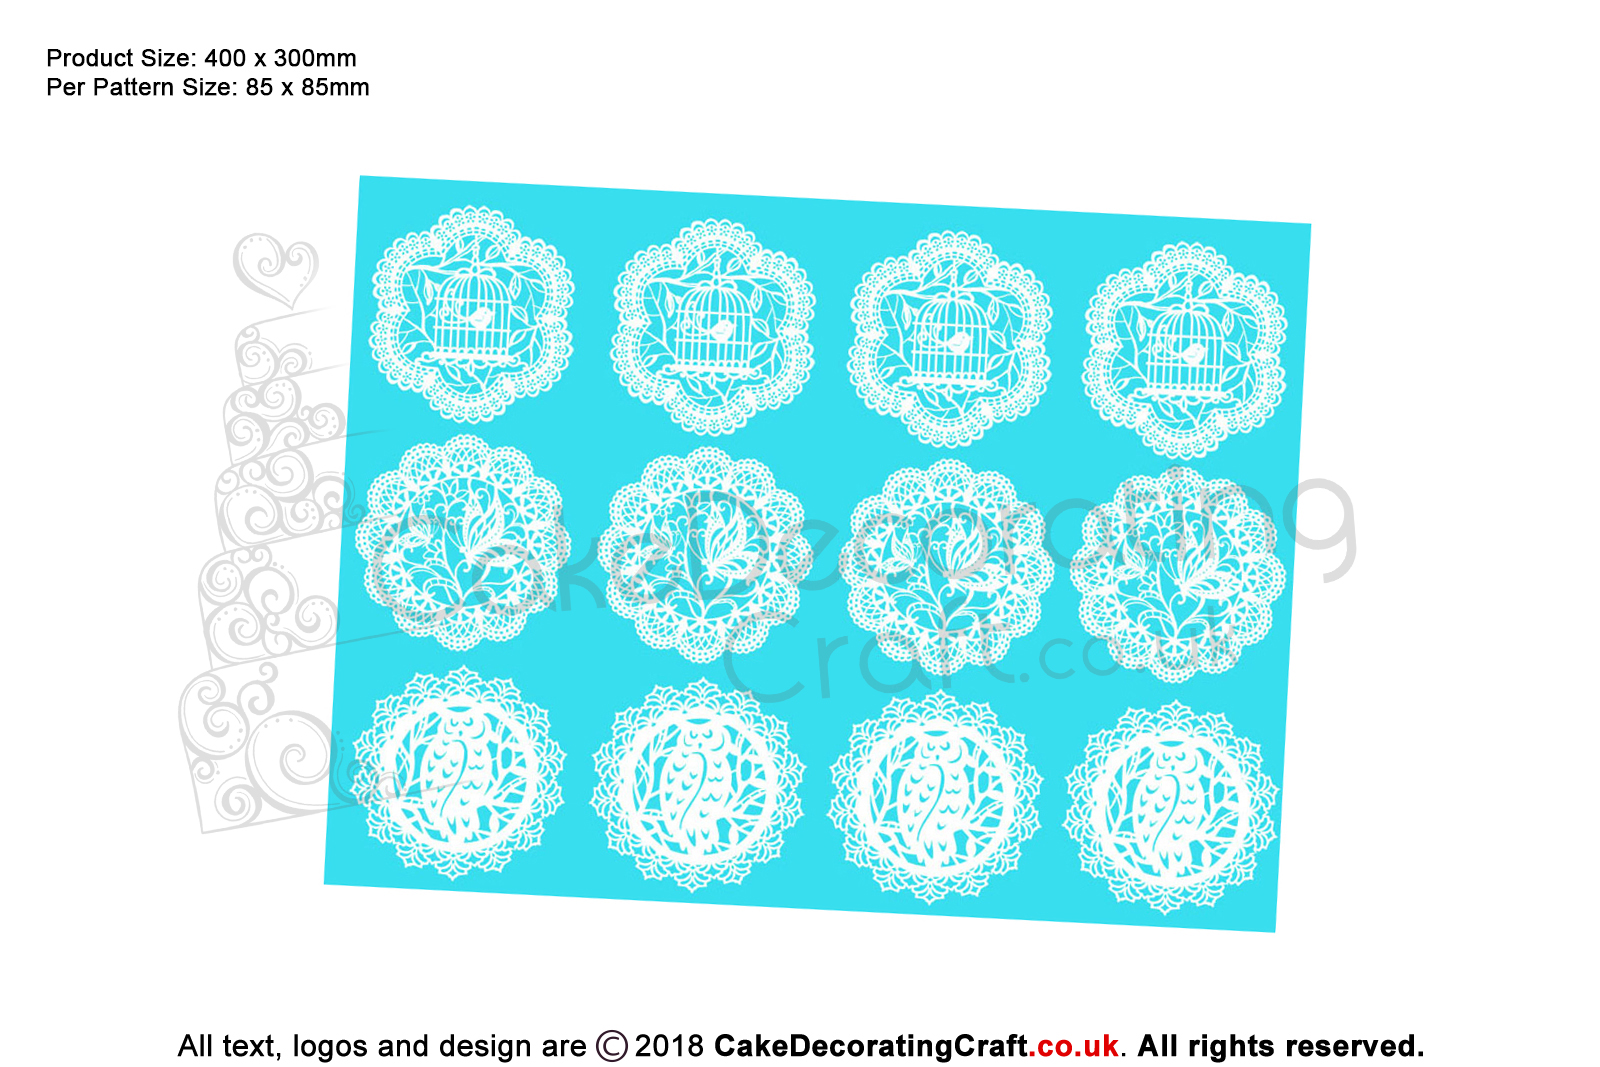 Summer Rush | Cake Lace Mats for Edible Cake Lace Mixes and Premixes | Cake Decorating Craft Tool | Cake Makers Christmas Gifts Ideas